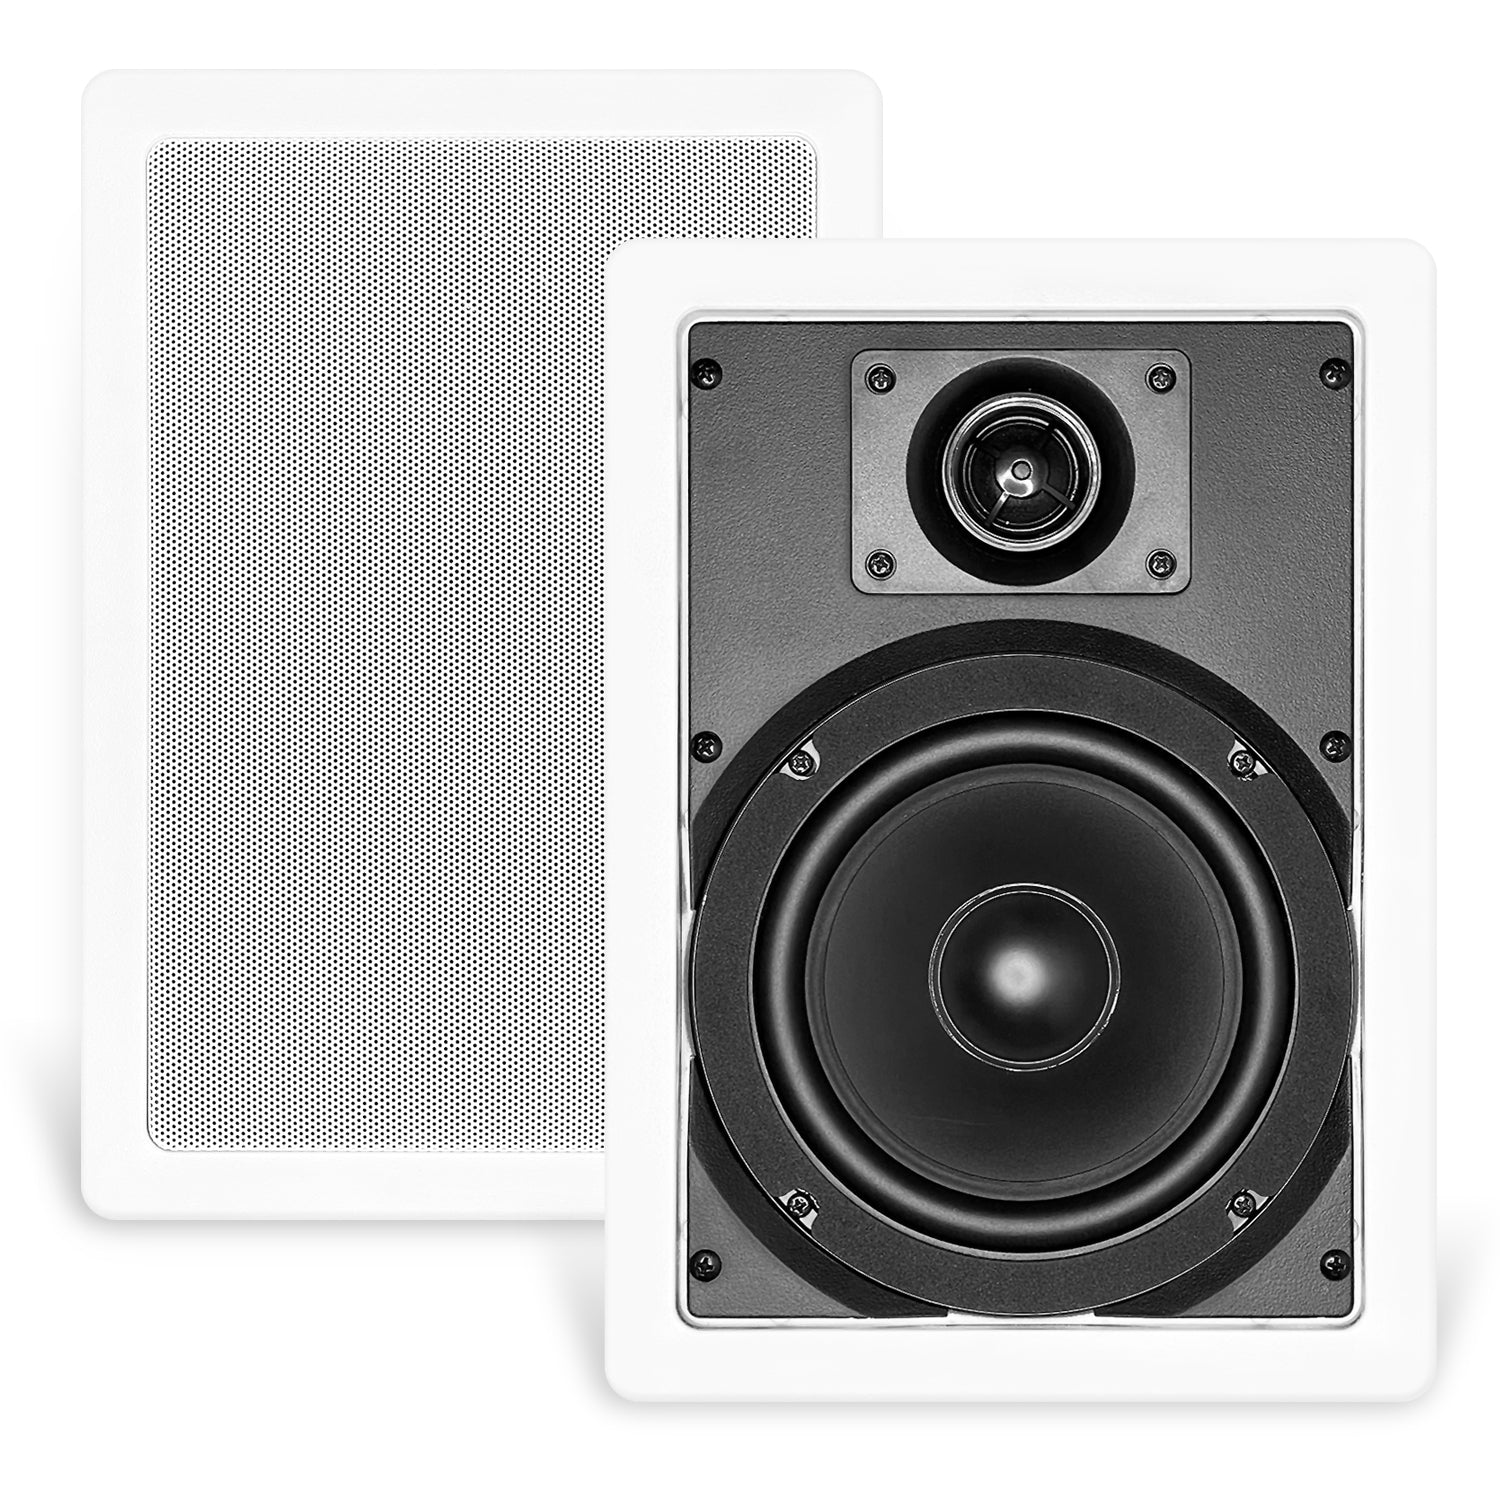 CT Sounds Bio In-Wall Home Audio Weatherproof Surround Sounds Speaker Set – SOUNDS